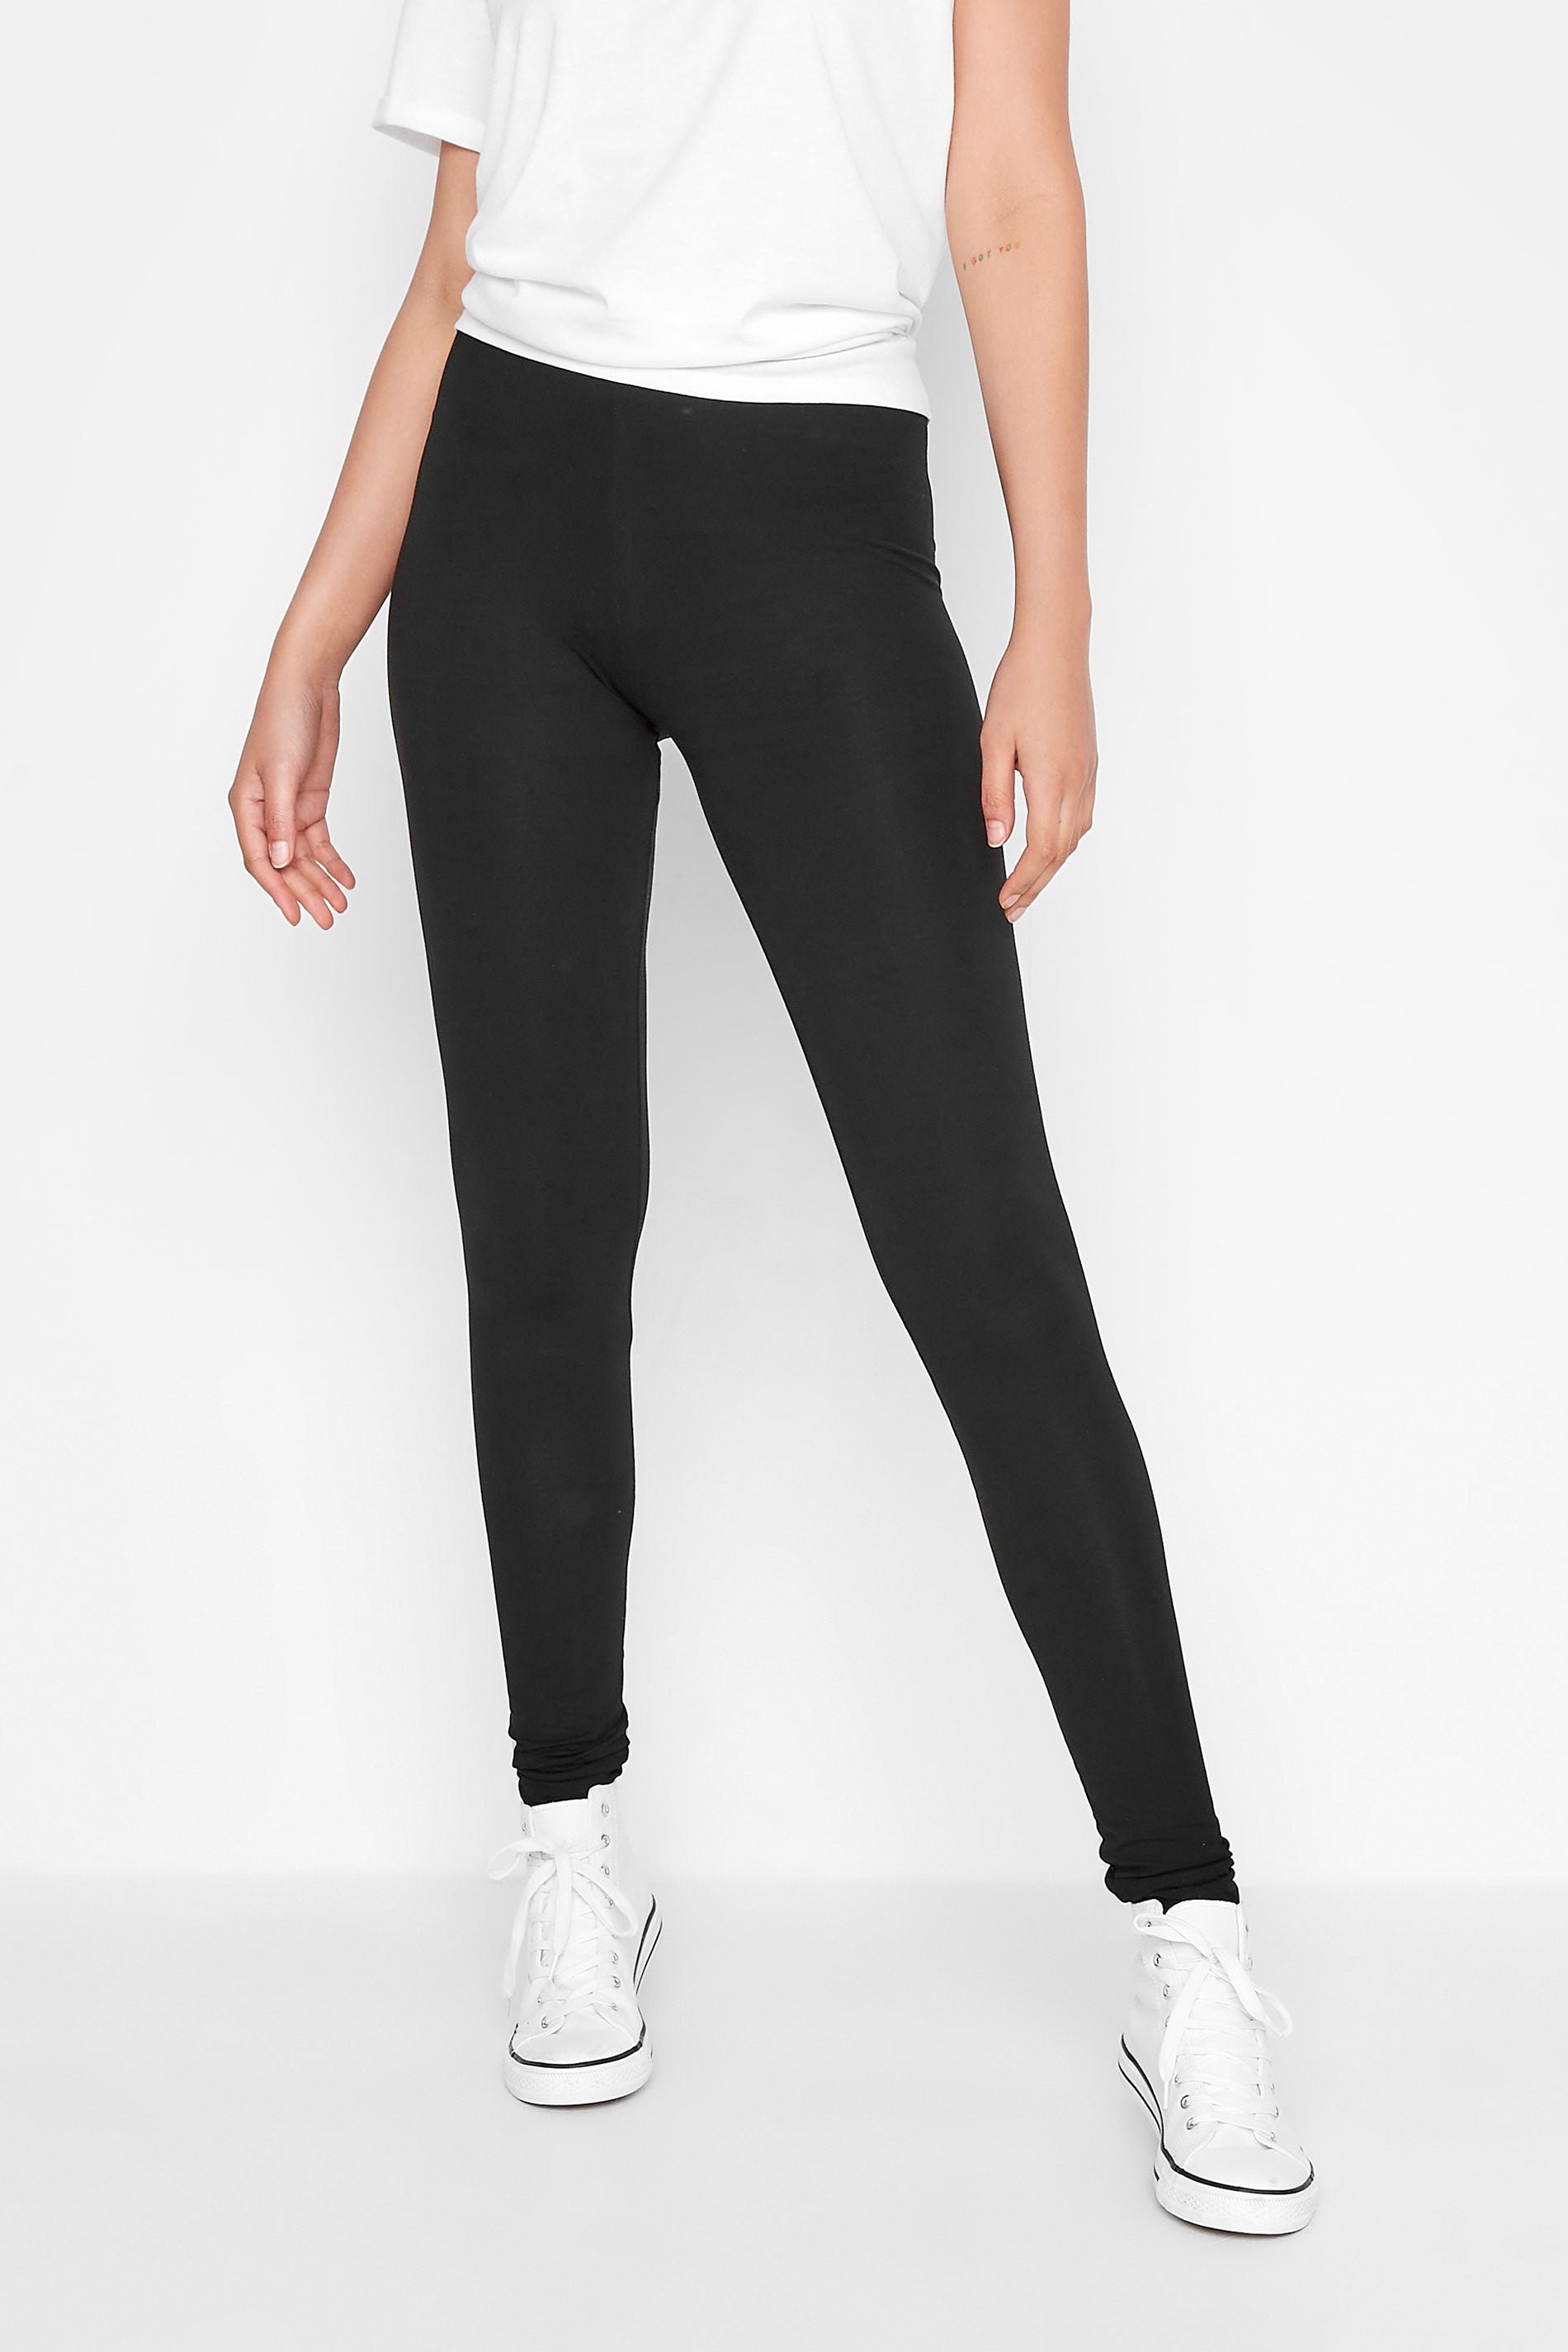 LTS MADE FOR GOOD Tall Black Stretch Cotton Leggings – Search By Inseam